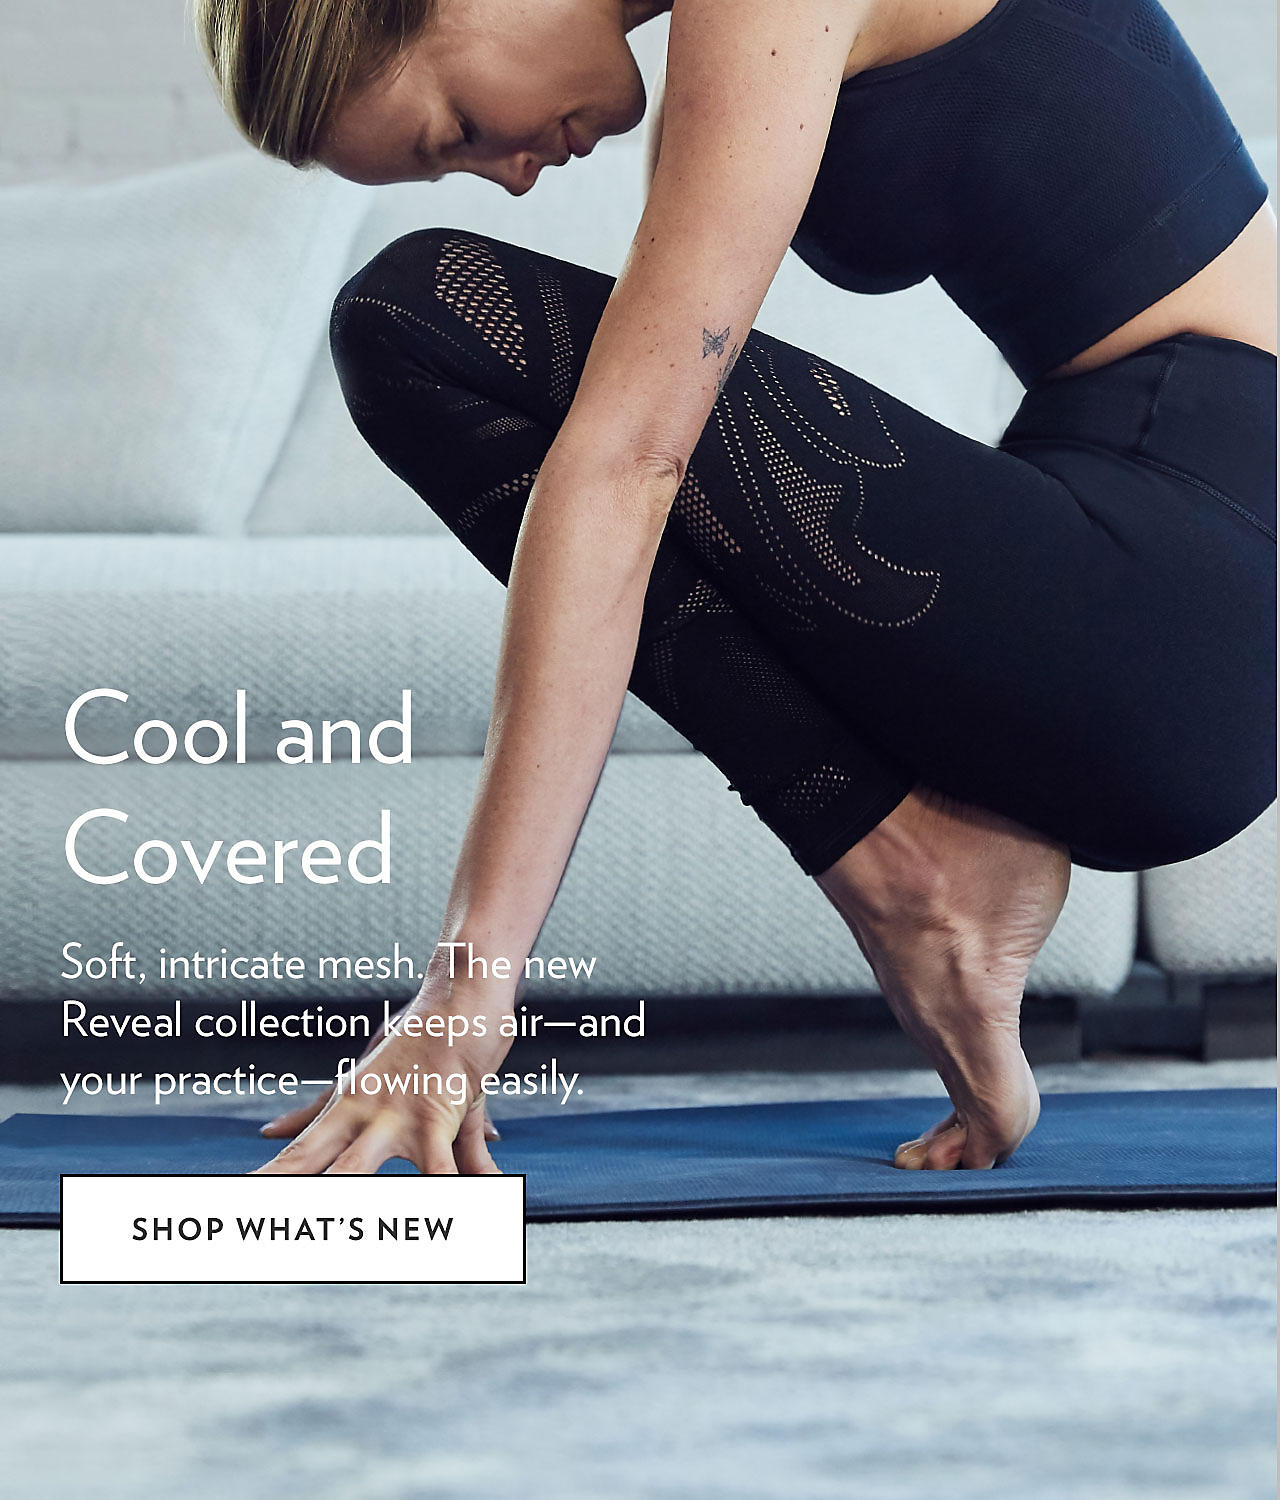 Cool and Covered - SHOP WHAT'S NEW